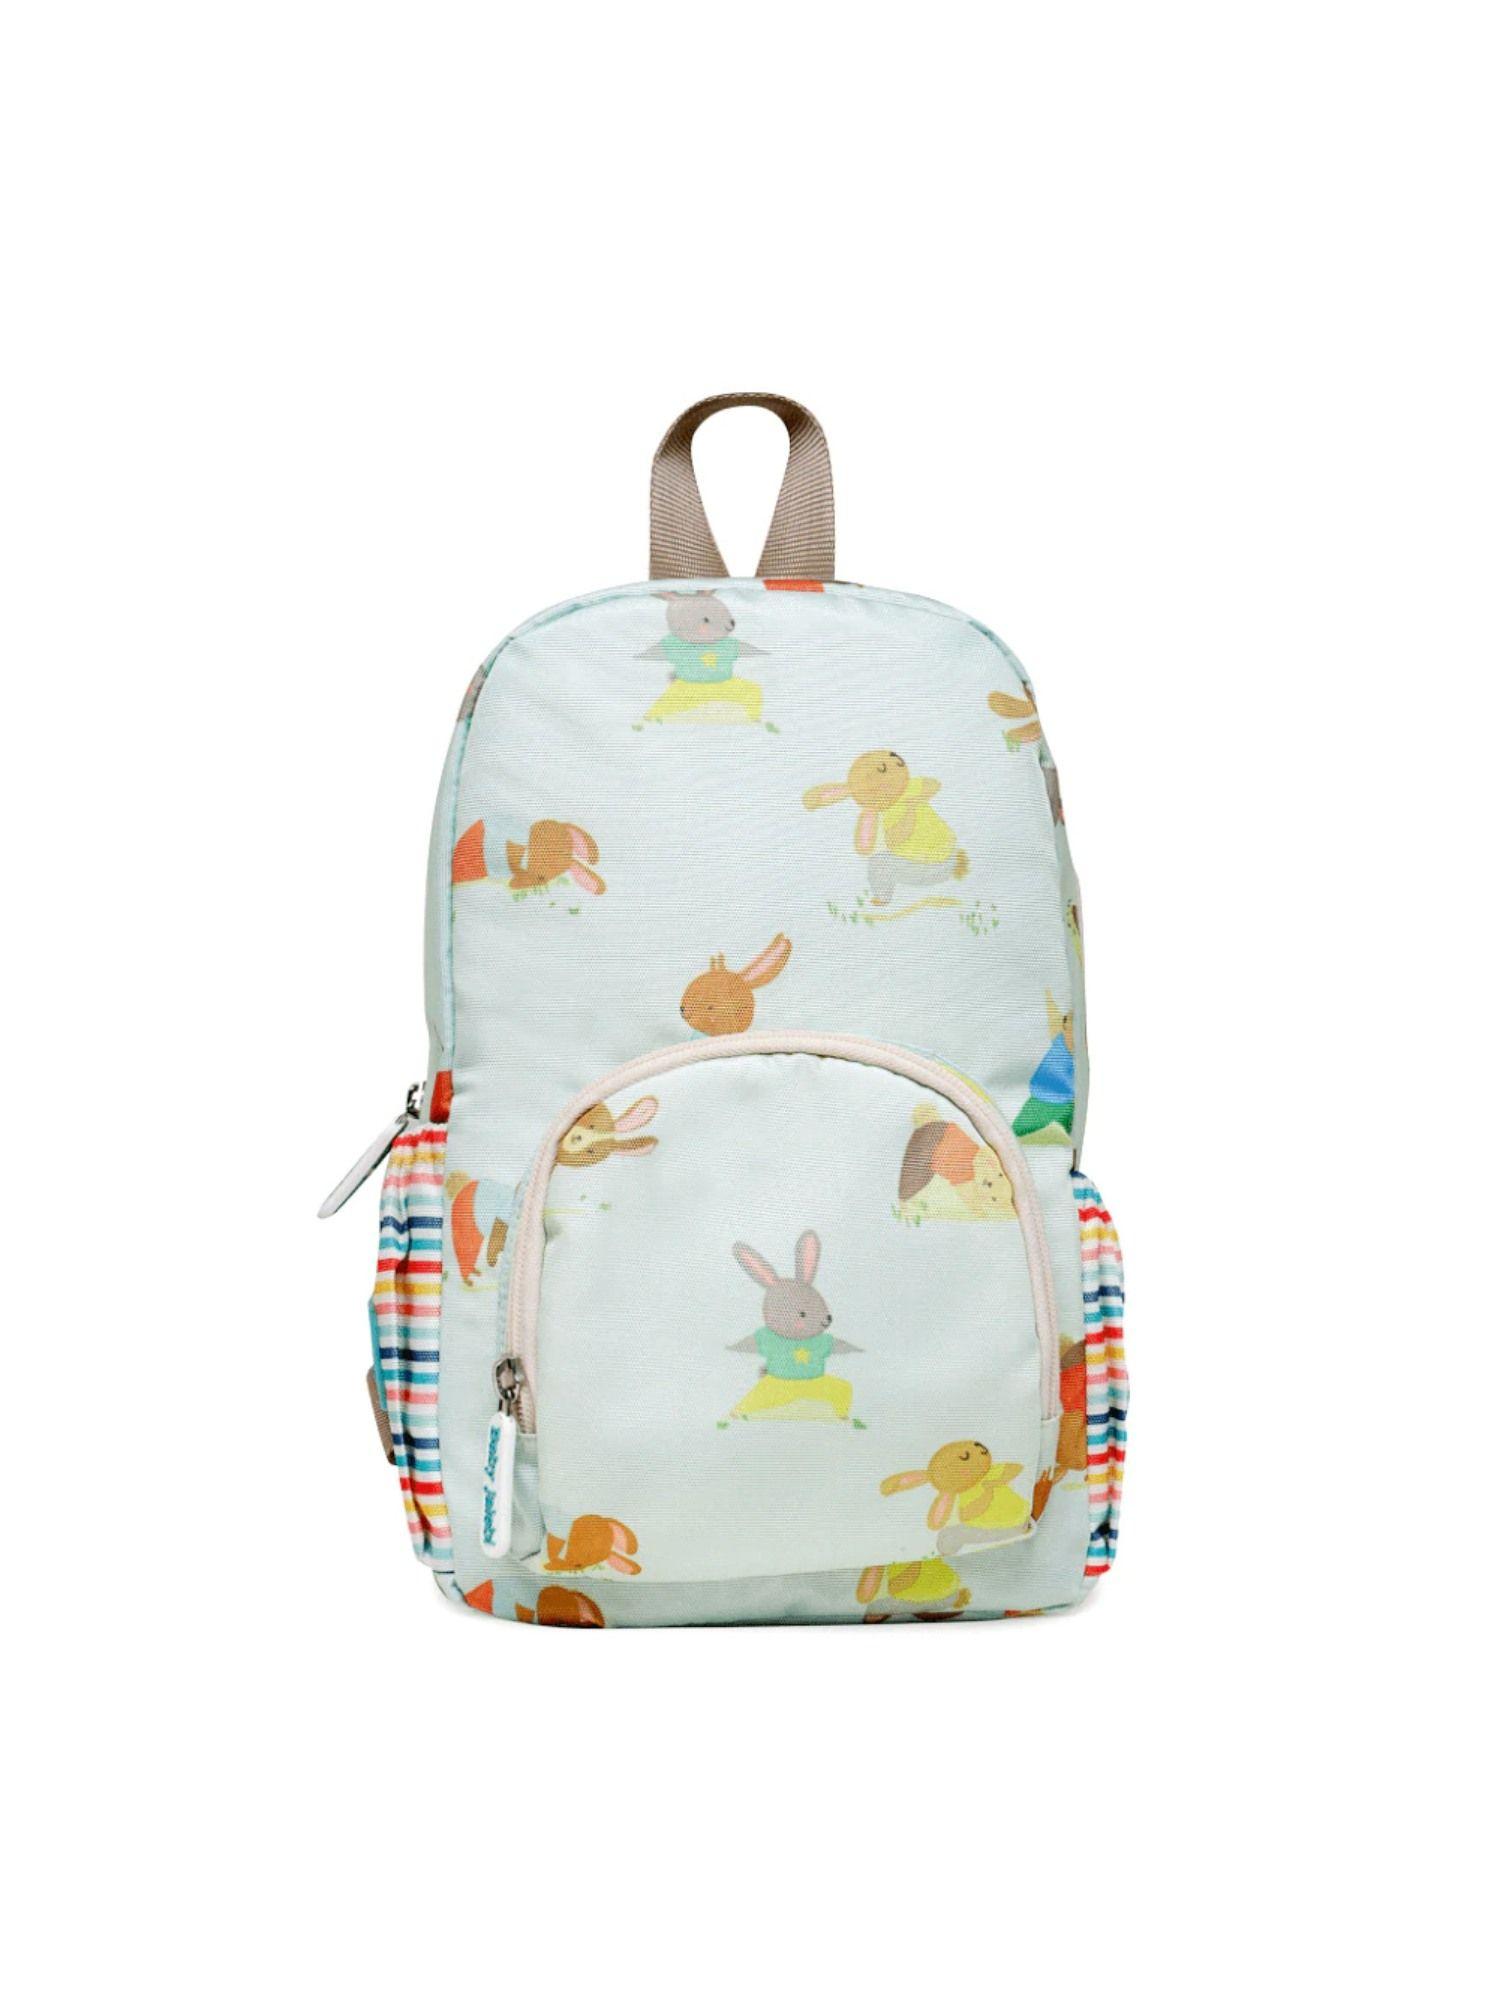 personalized yoga bunny 11 inches mini backpack 1.5 to 3 years